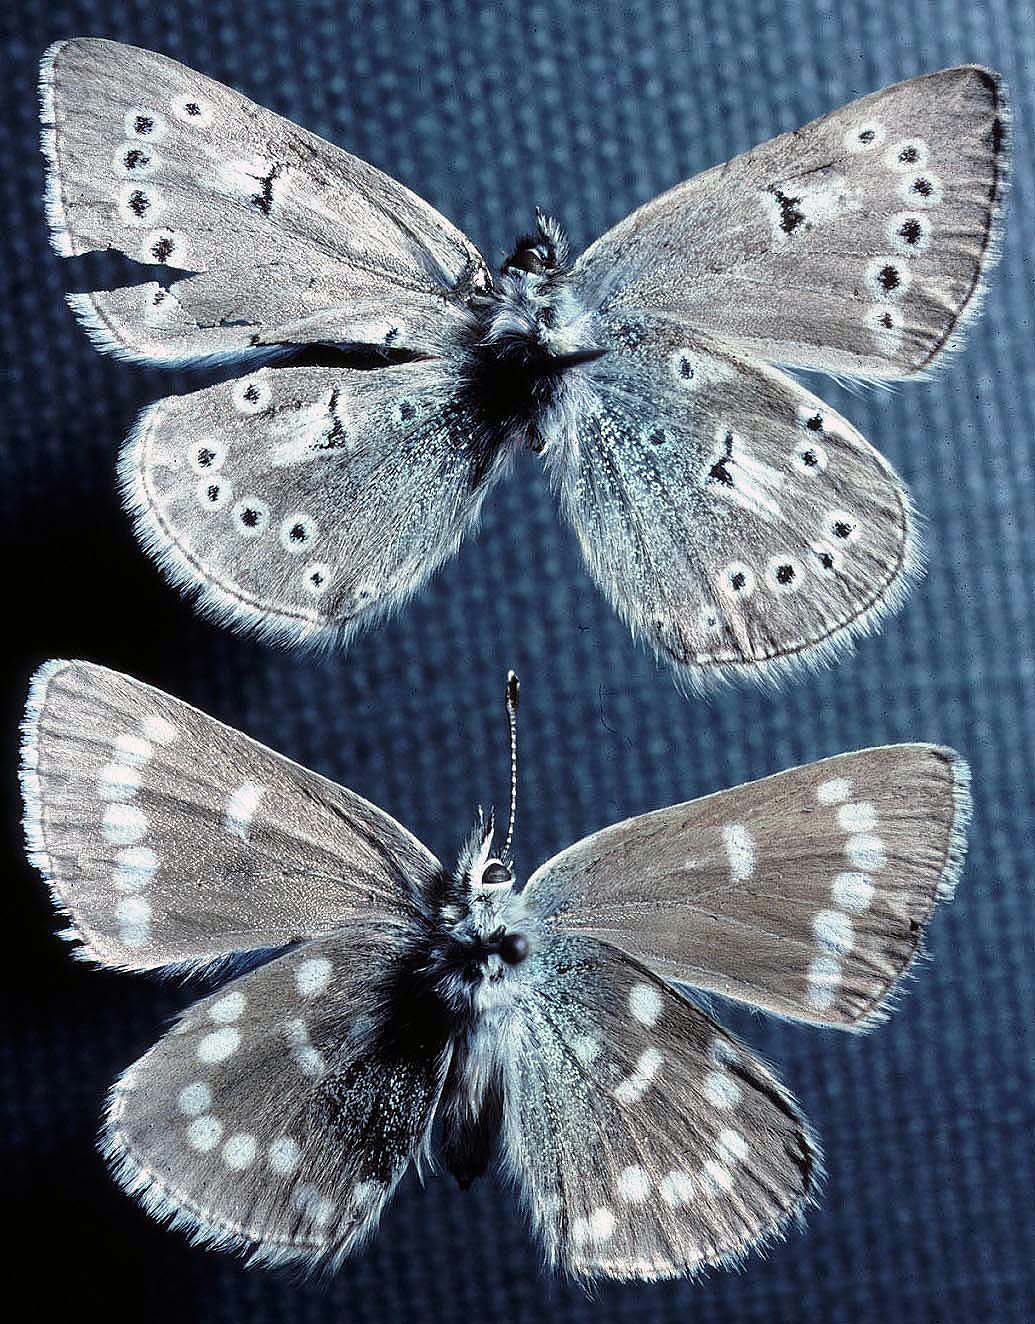 Two tattered blue and gray butterflies are mounted on pins. Specimens like these are all that remain of the Xerces blue butterfly.